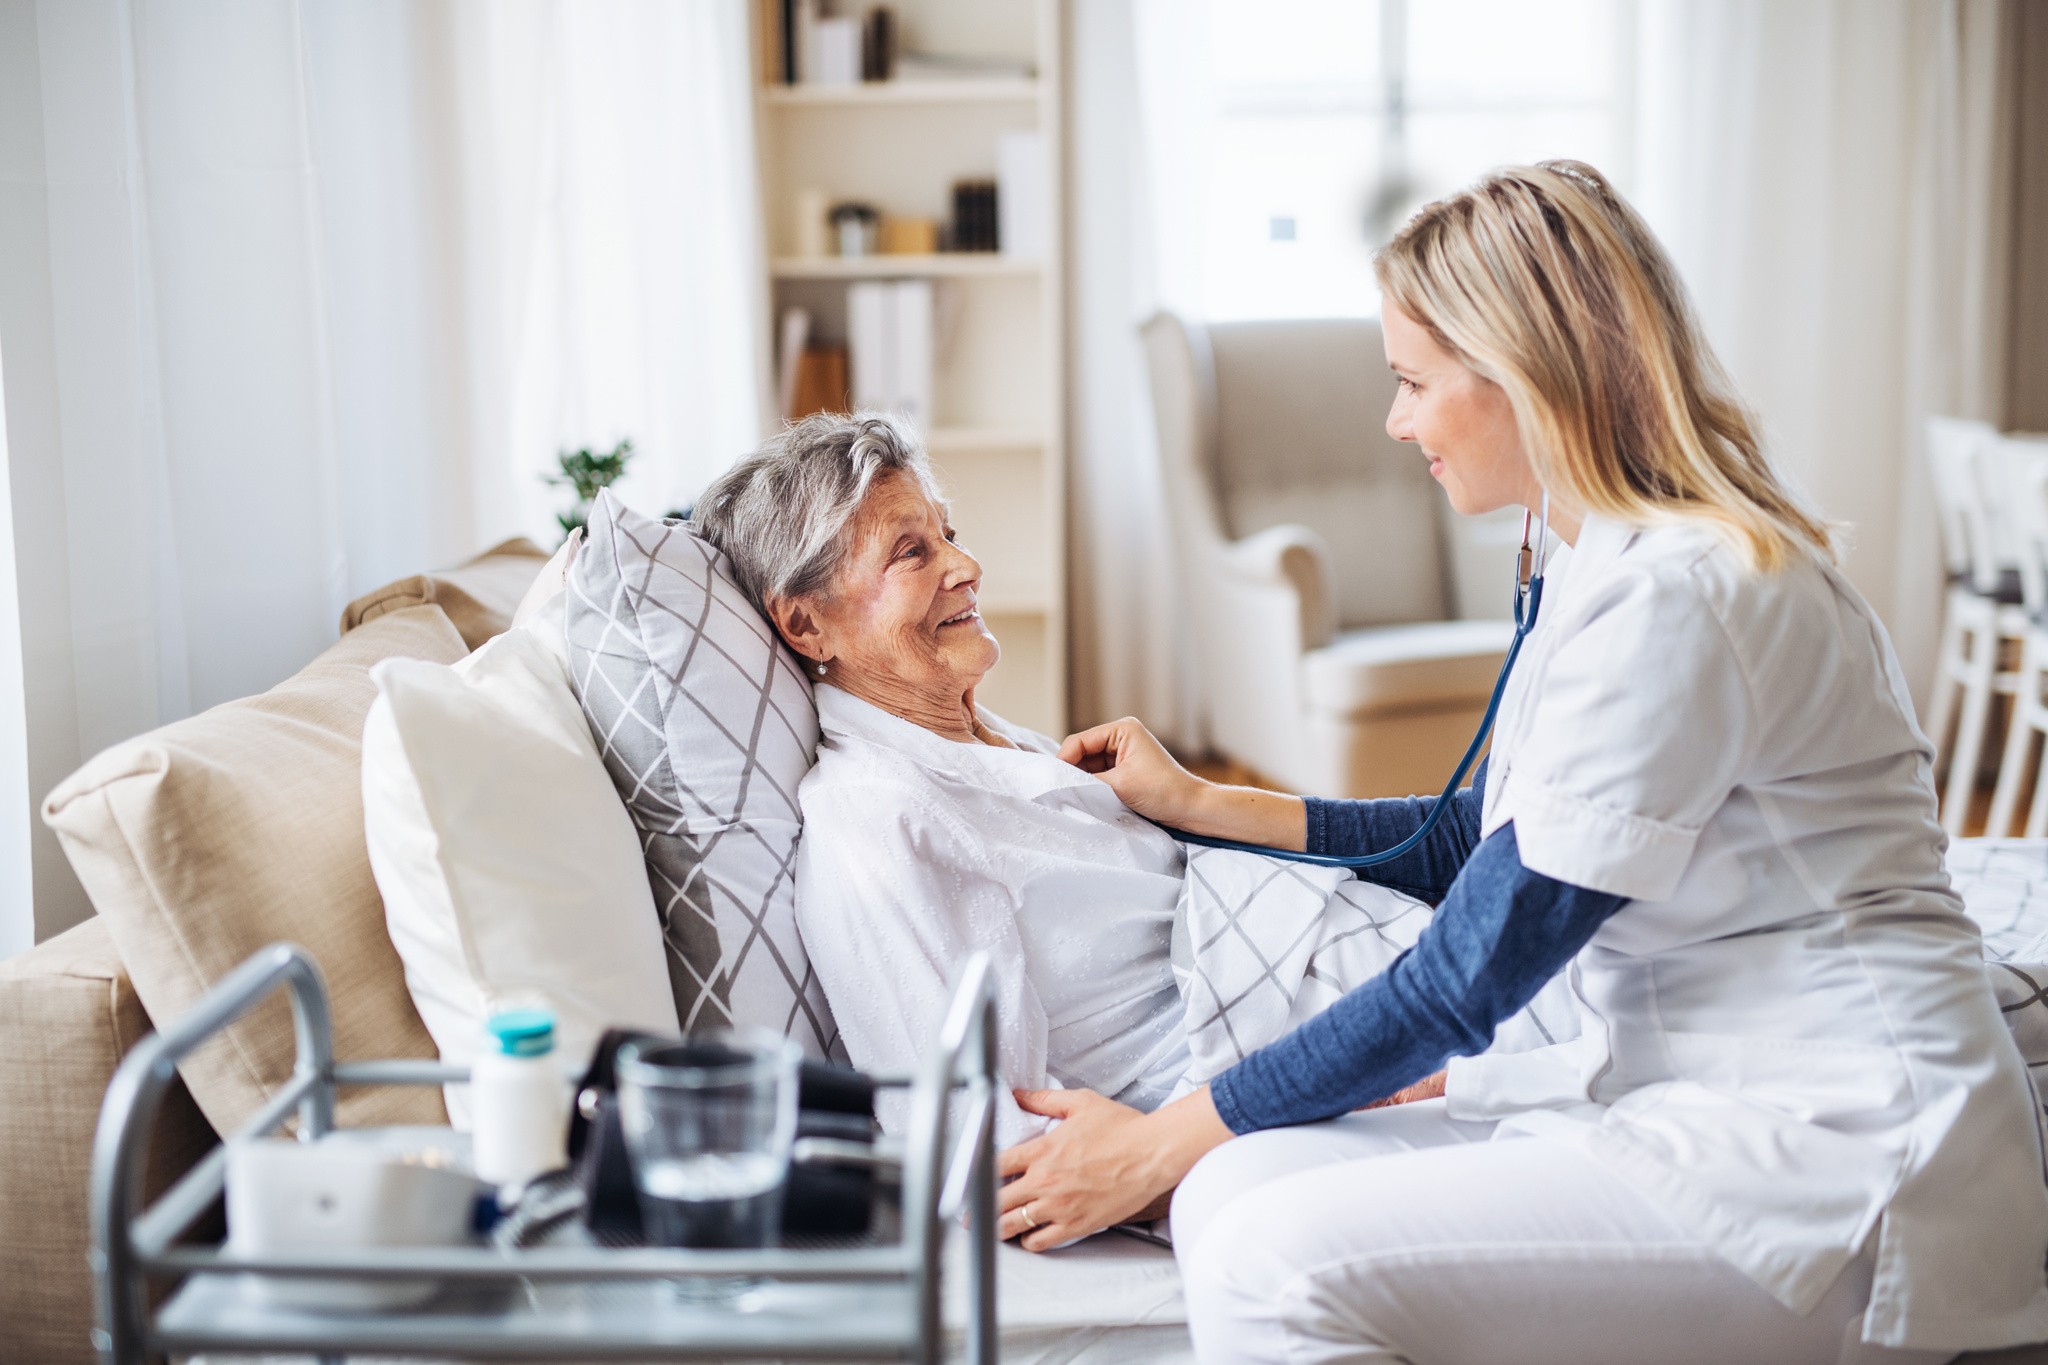 All About Home Health Care Services - Updated for 2021 - AgingInPlace.org